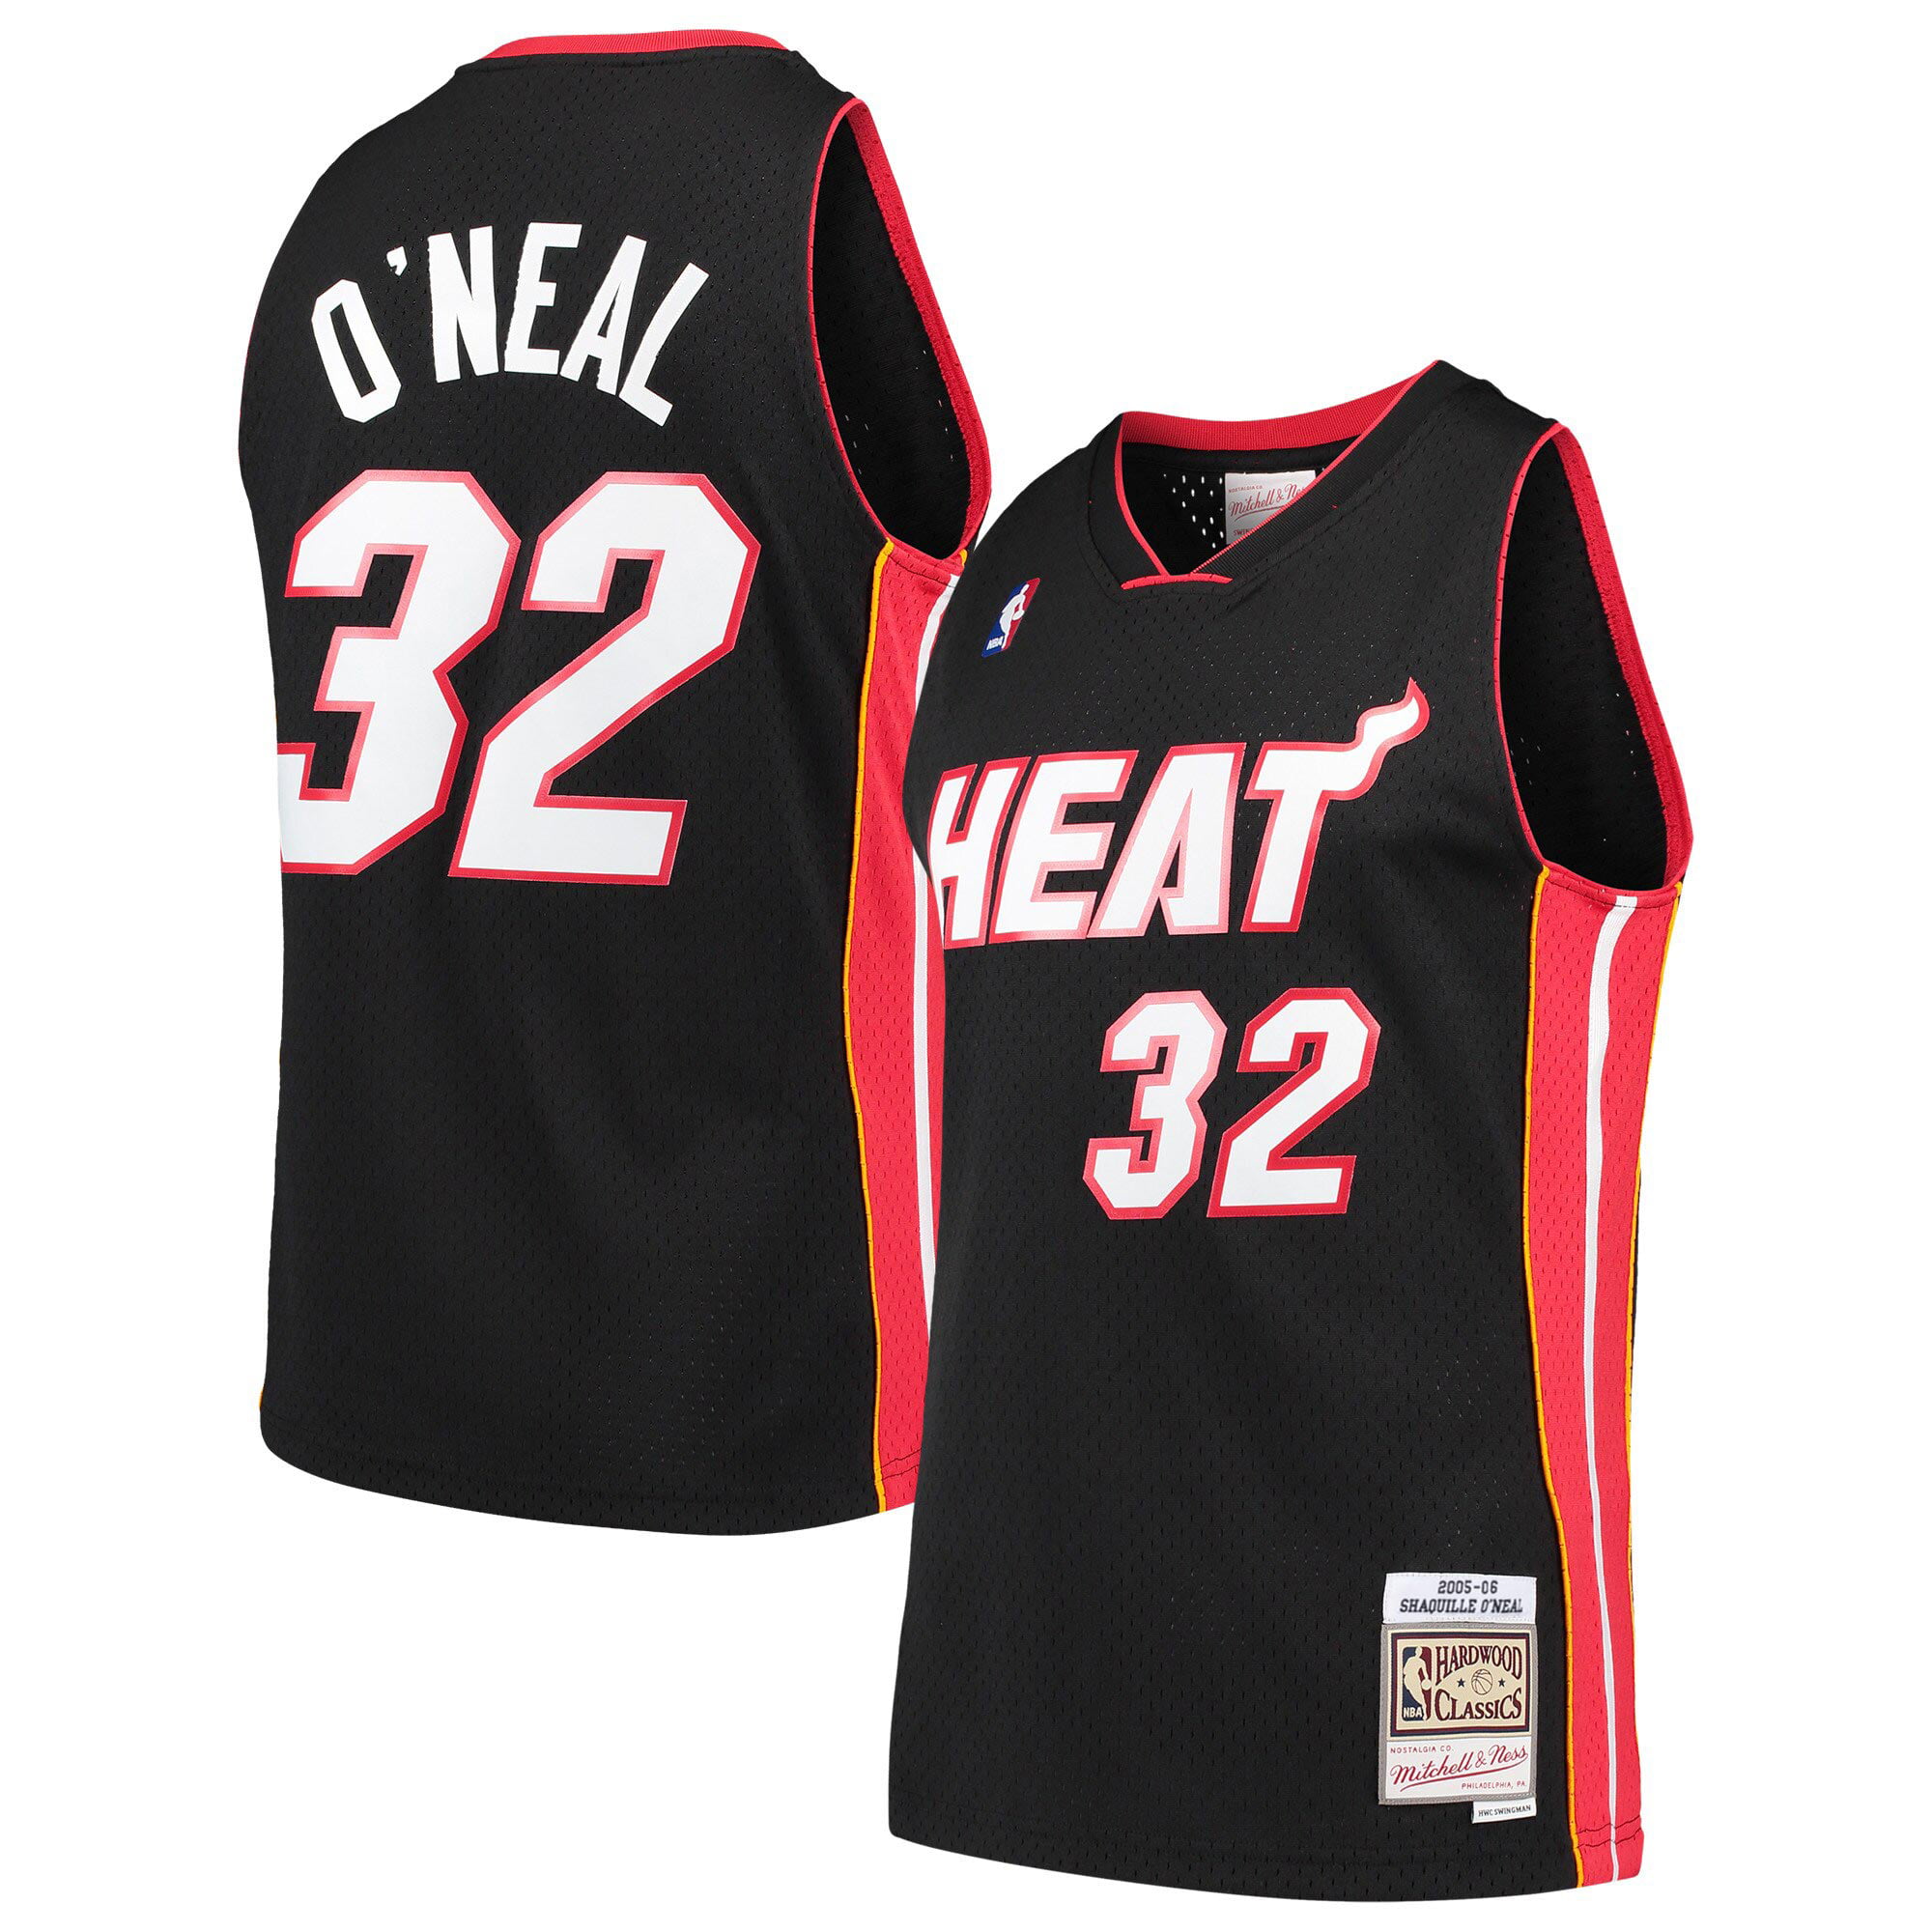 Shaquille O'Neal Miami Heat Mitchell & Ness NBA Authentic Jersey